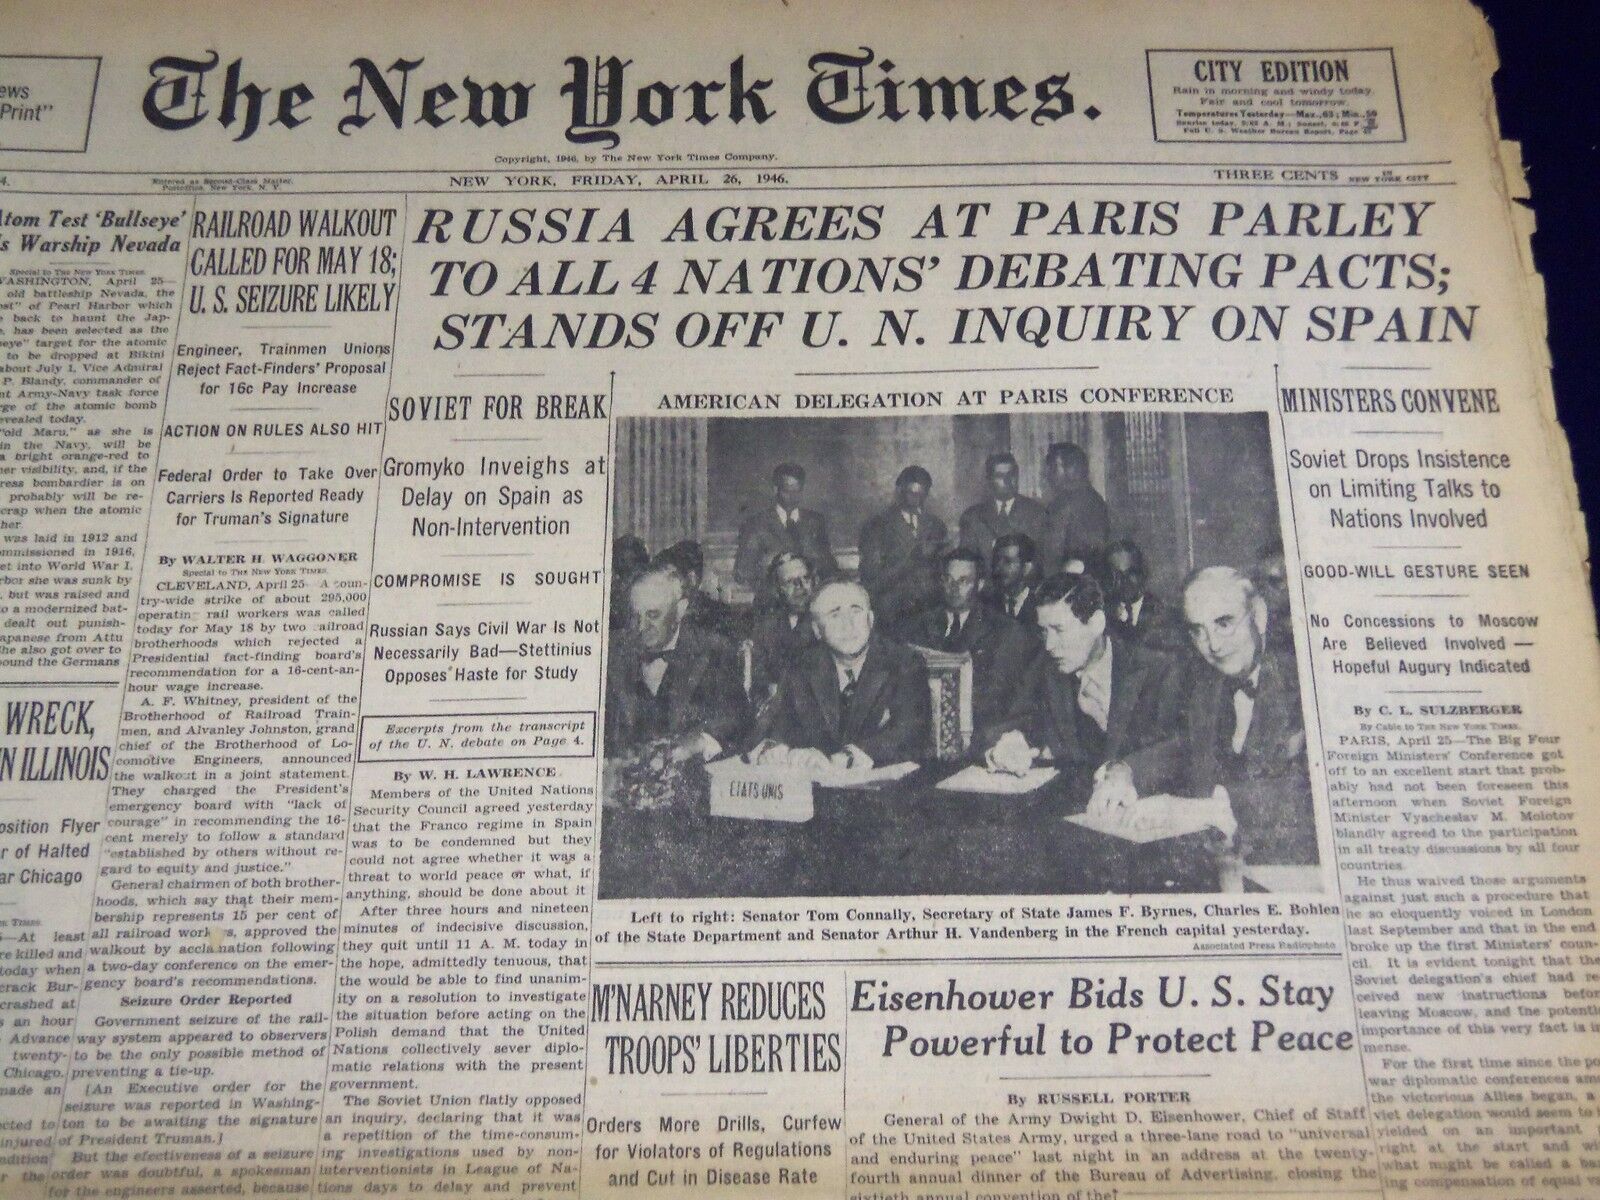 1946 APRIL 26 NEW YORK TIMES - AMERICAN DELEGATION AT PARIS CONFERENCE - NT 2302